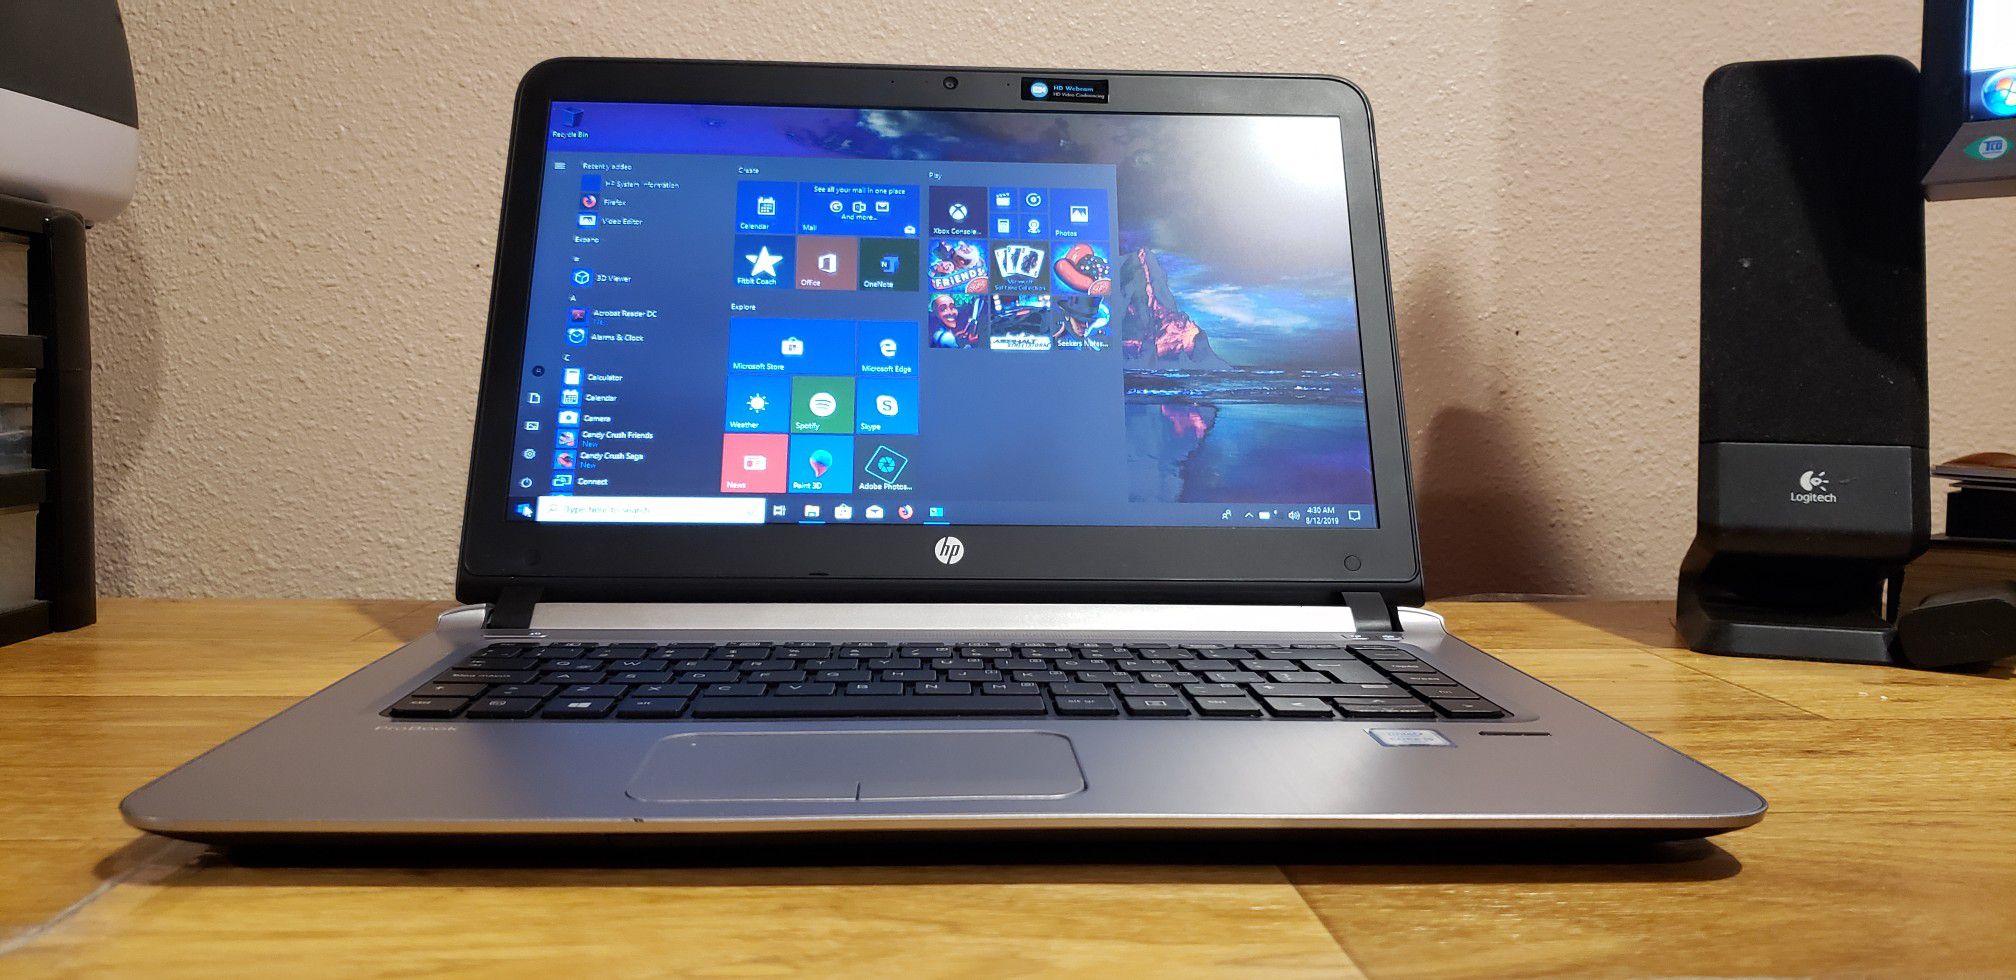 NOTEBOOK /LAPTOP NEWER HP "14in" FAST i5-INTEL/Max@2.80GHz,1000GB-HD,12GB-RAM,Win10Pro,WiFi,Online-$550+,My Was-$399, know SALE-$259/firm.